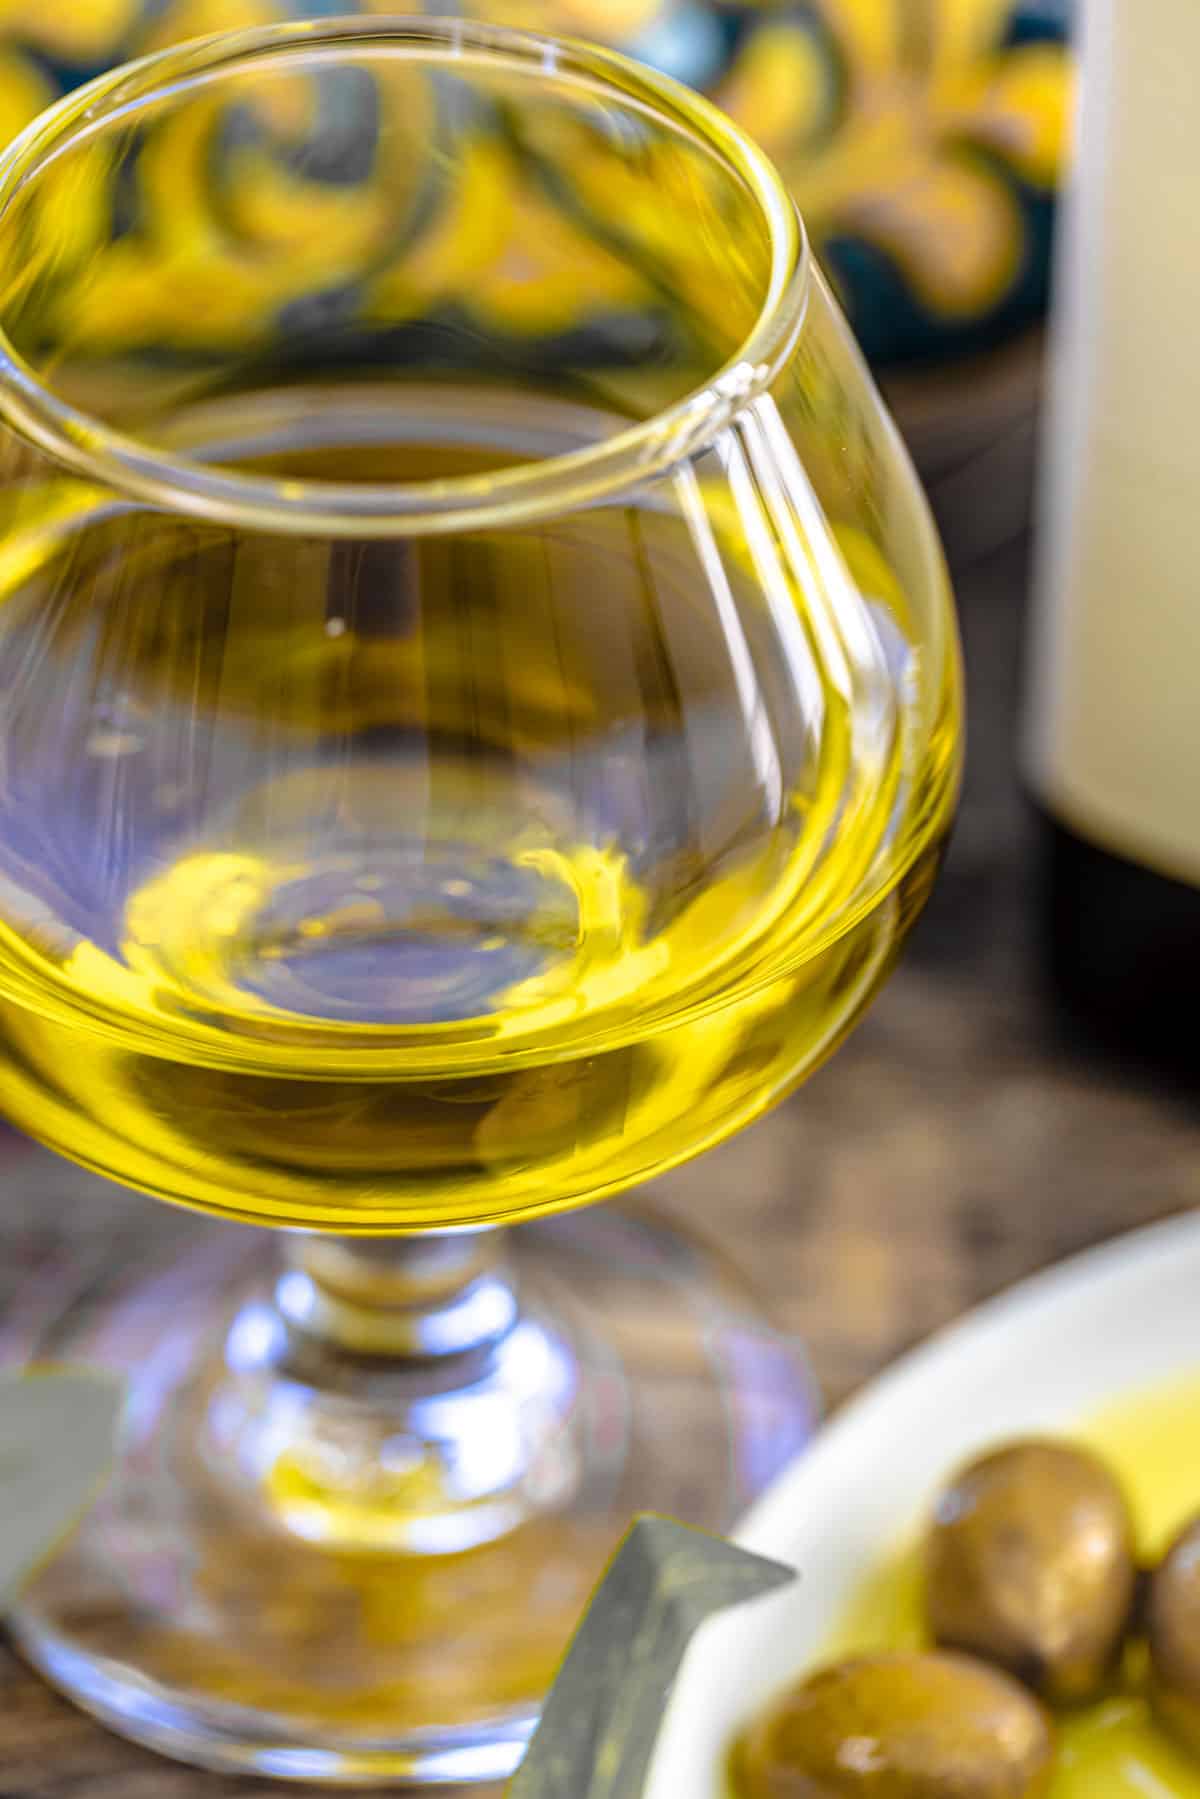 a close up of a small glass of olive oil and a plate of green olives.